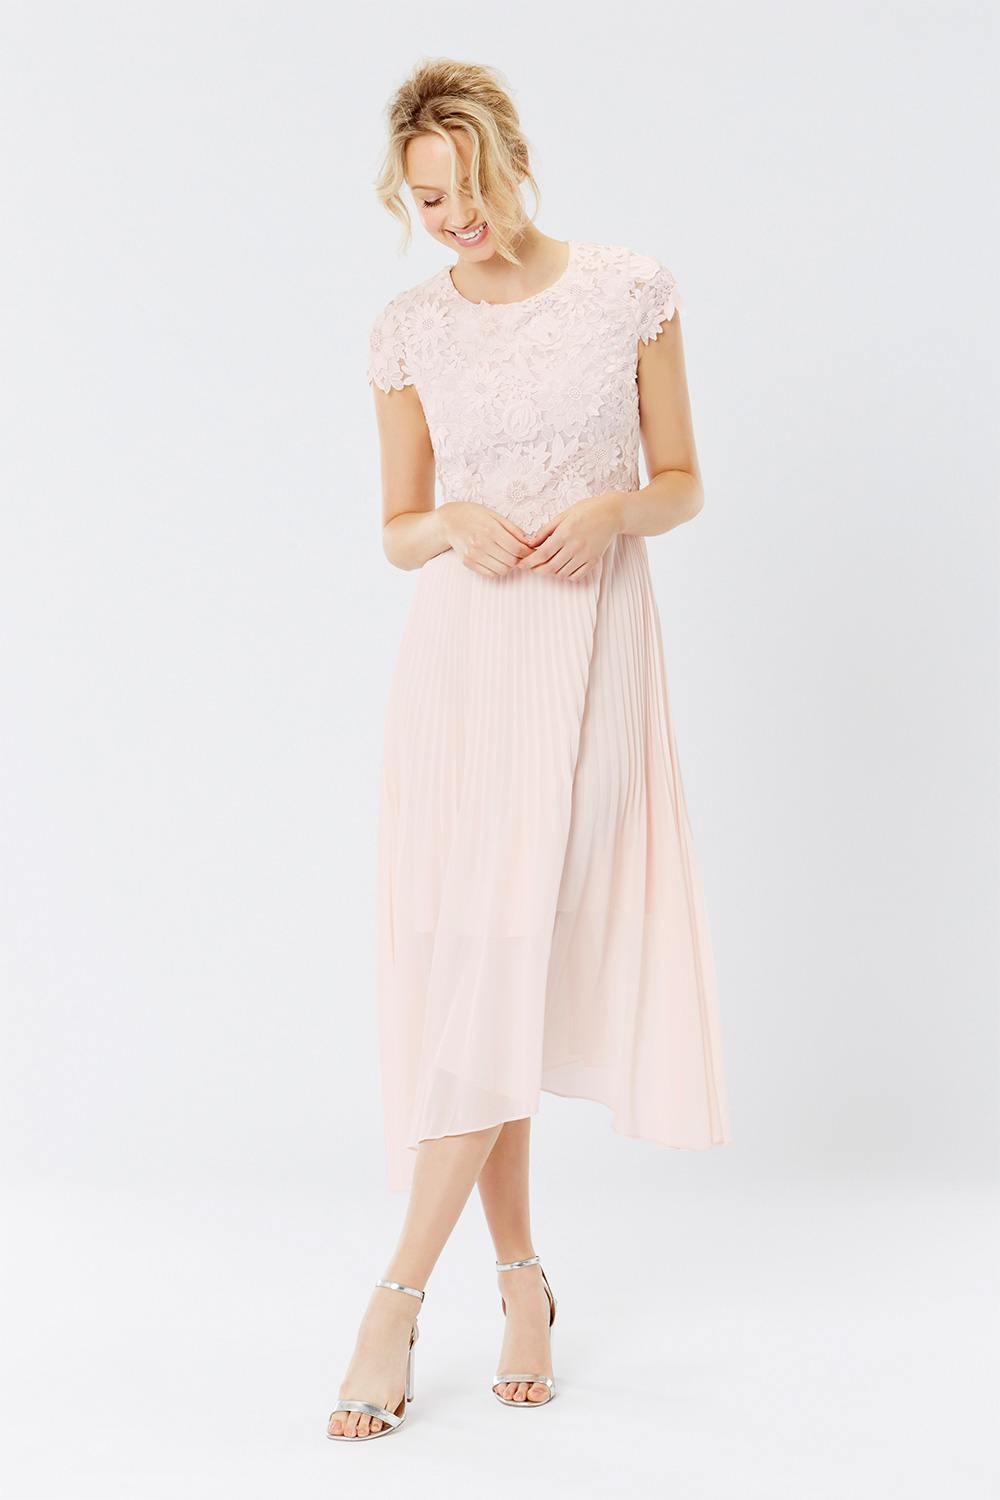 A great choice for the perfect bridesmaid dress